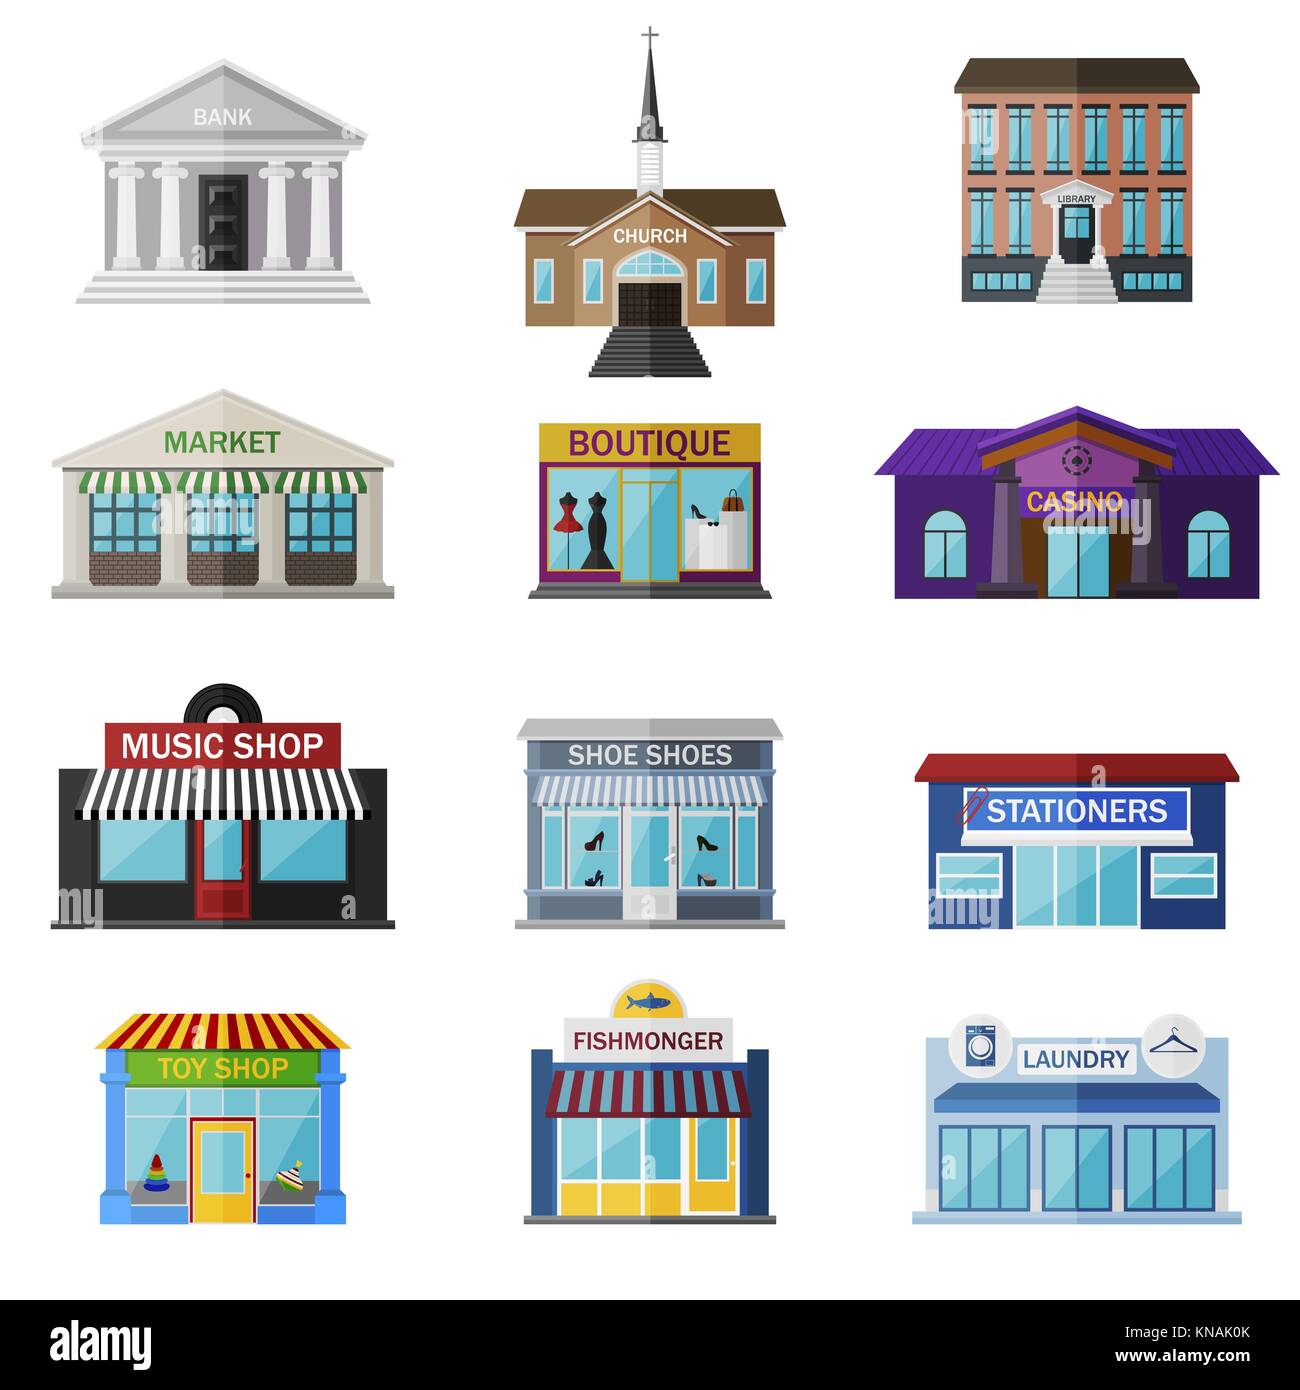 Different shops, institutions and stores flat icon set isolated on white. Includes bank, church, library, market, boutique, casino, music shop, shoe shues, stationers, toy shop, fish monger, laundry Stock Vector